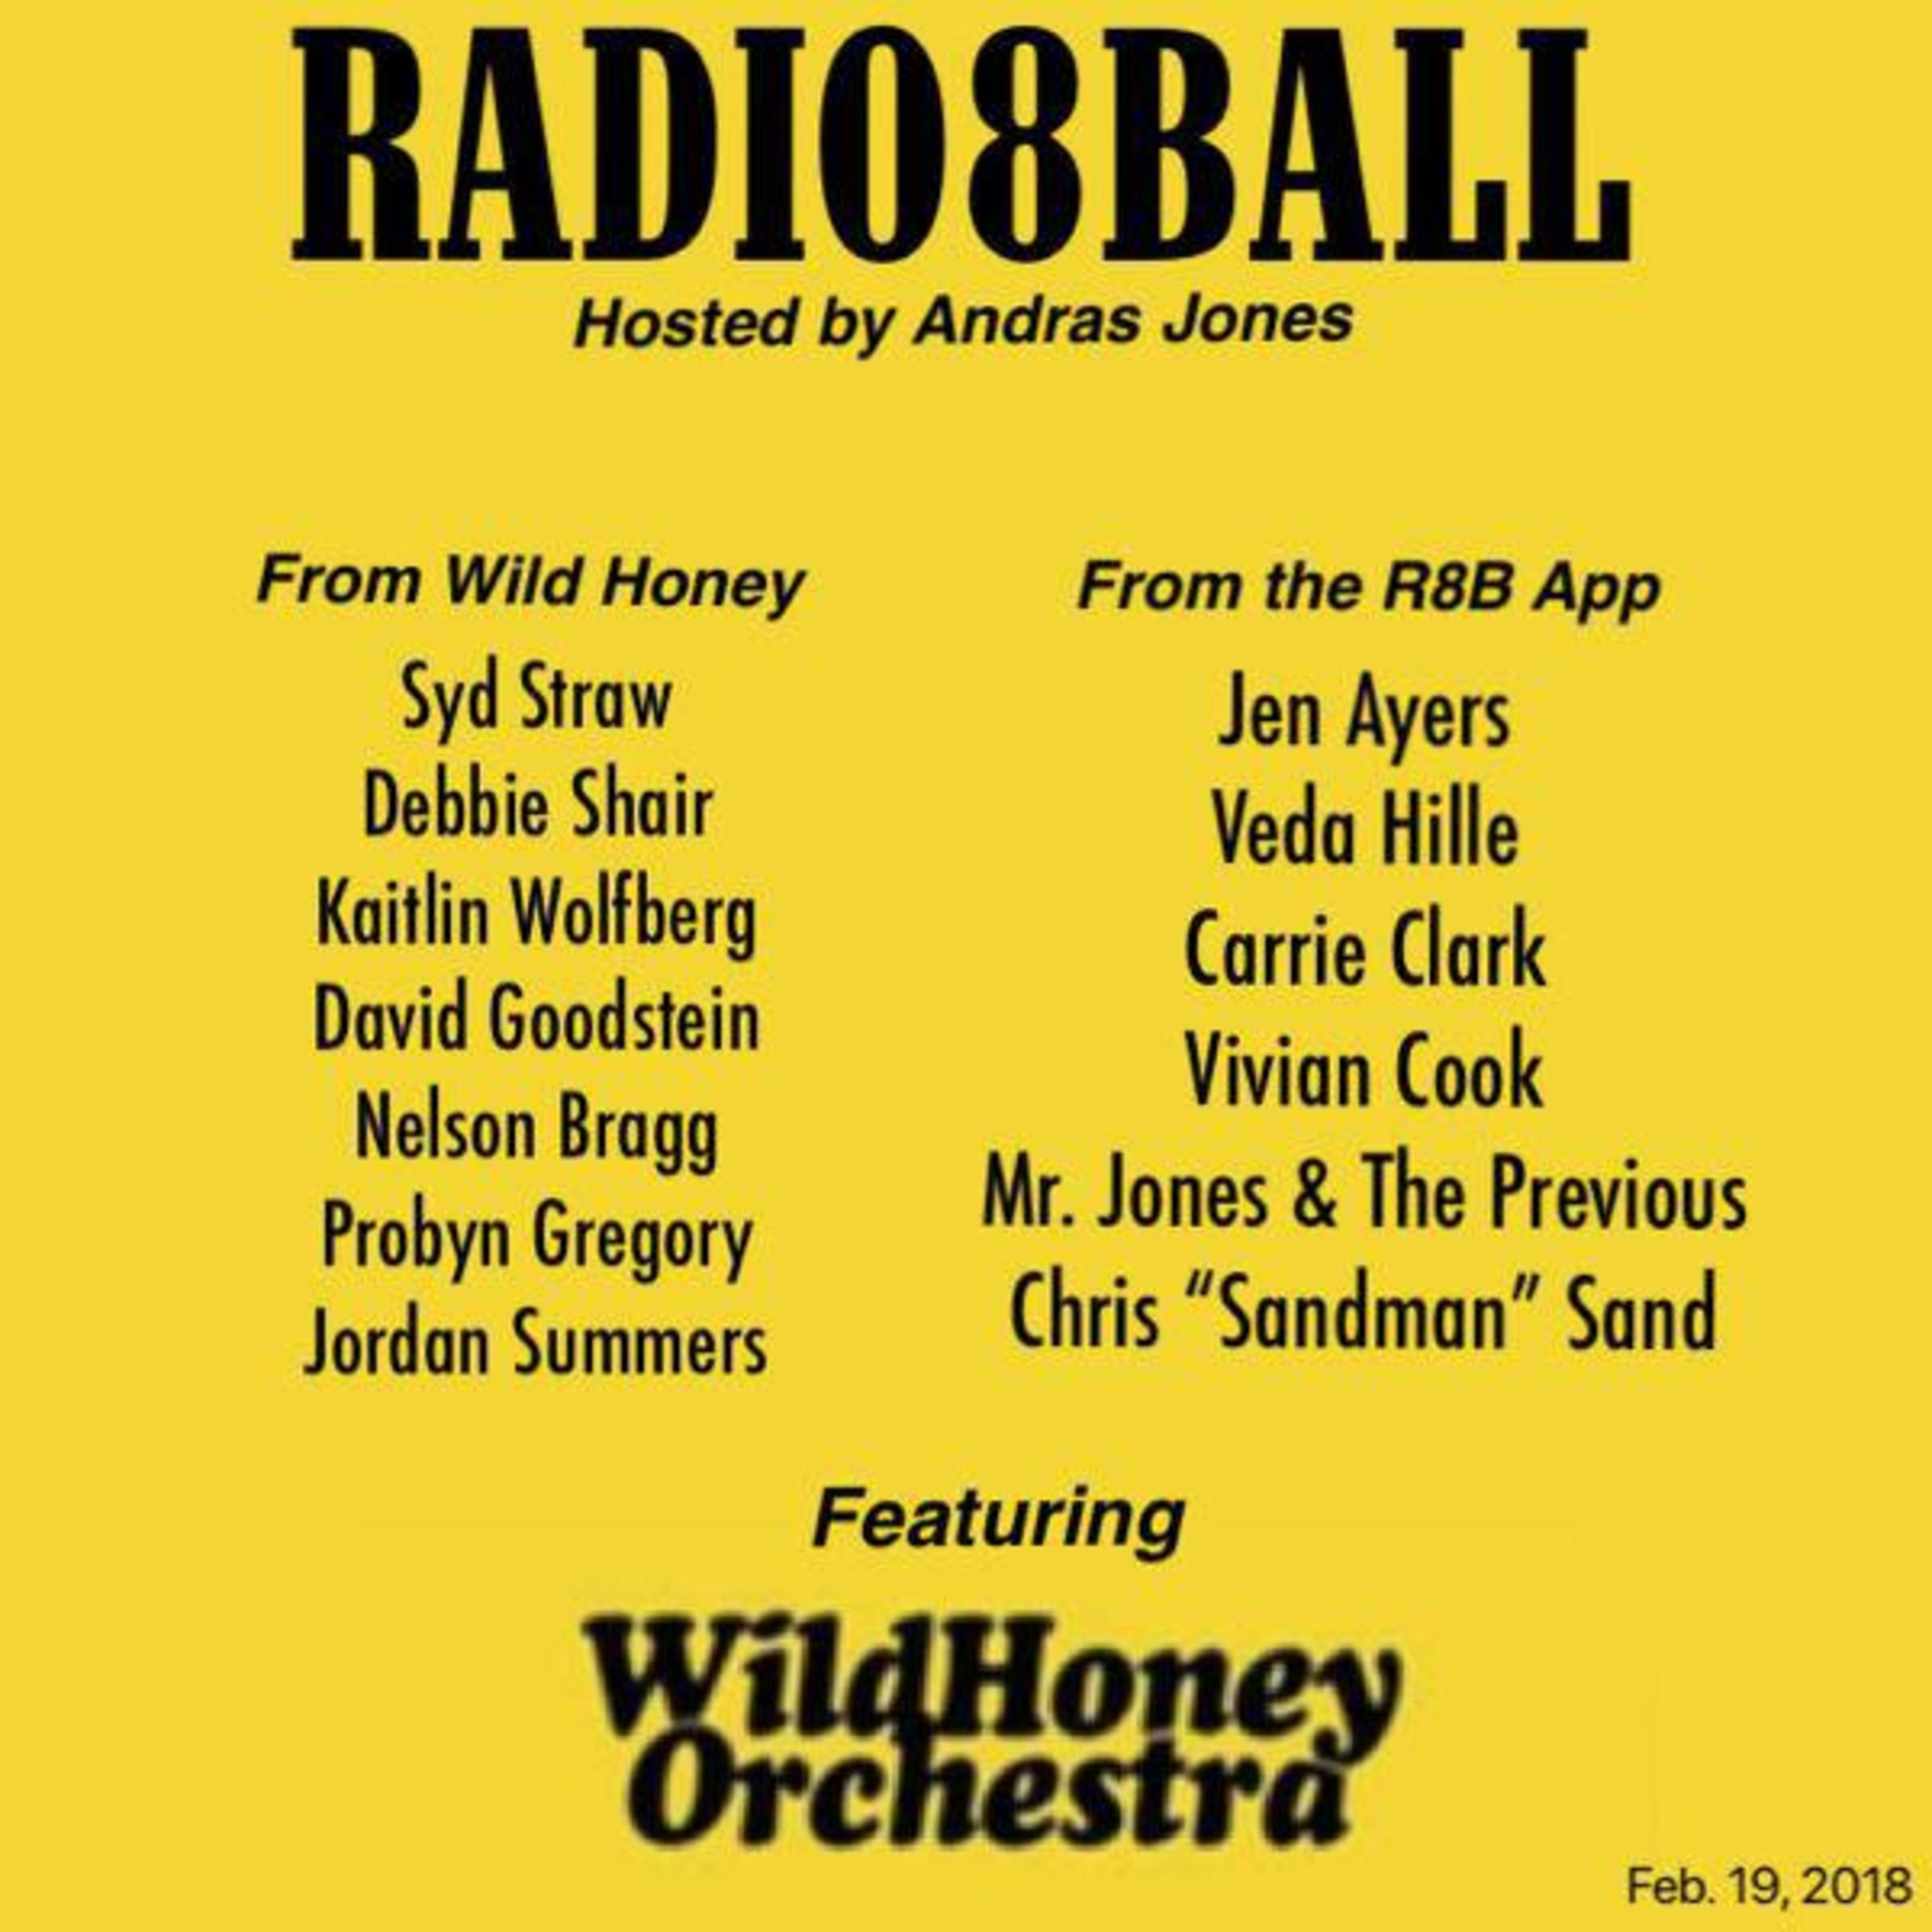 184: Jordan Summers of The Wild Honey Orchestra & Veda Hille  (March 18, 2018 - Pod 8)